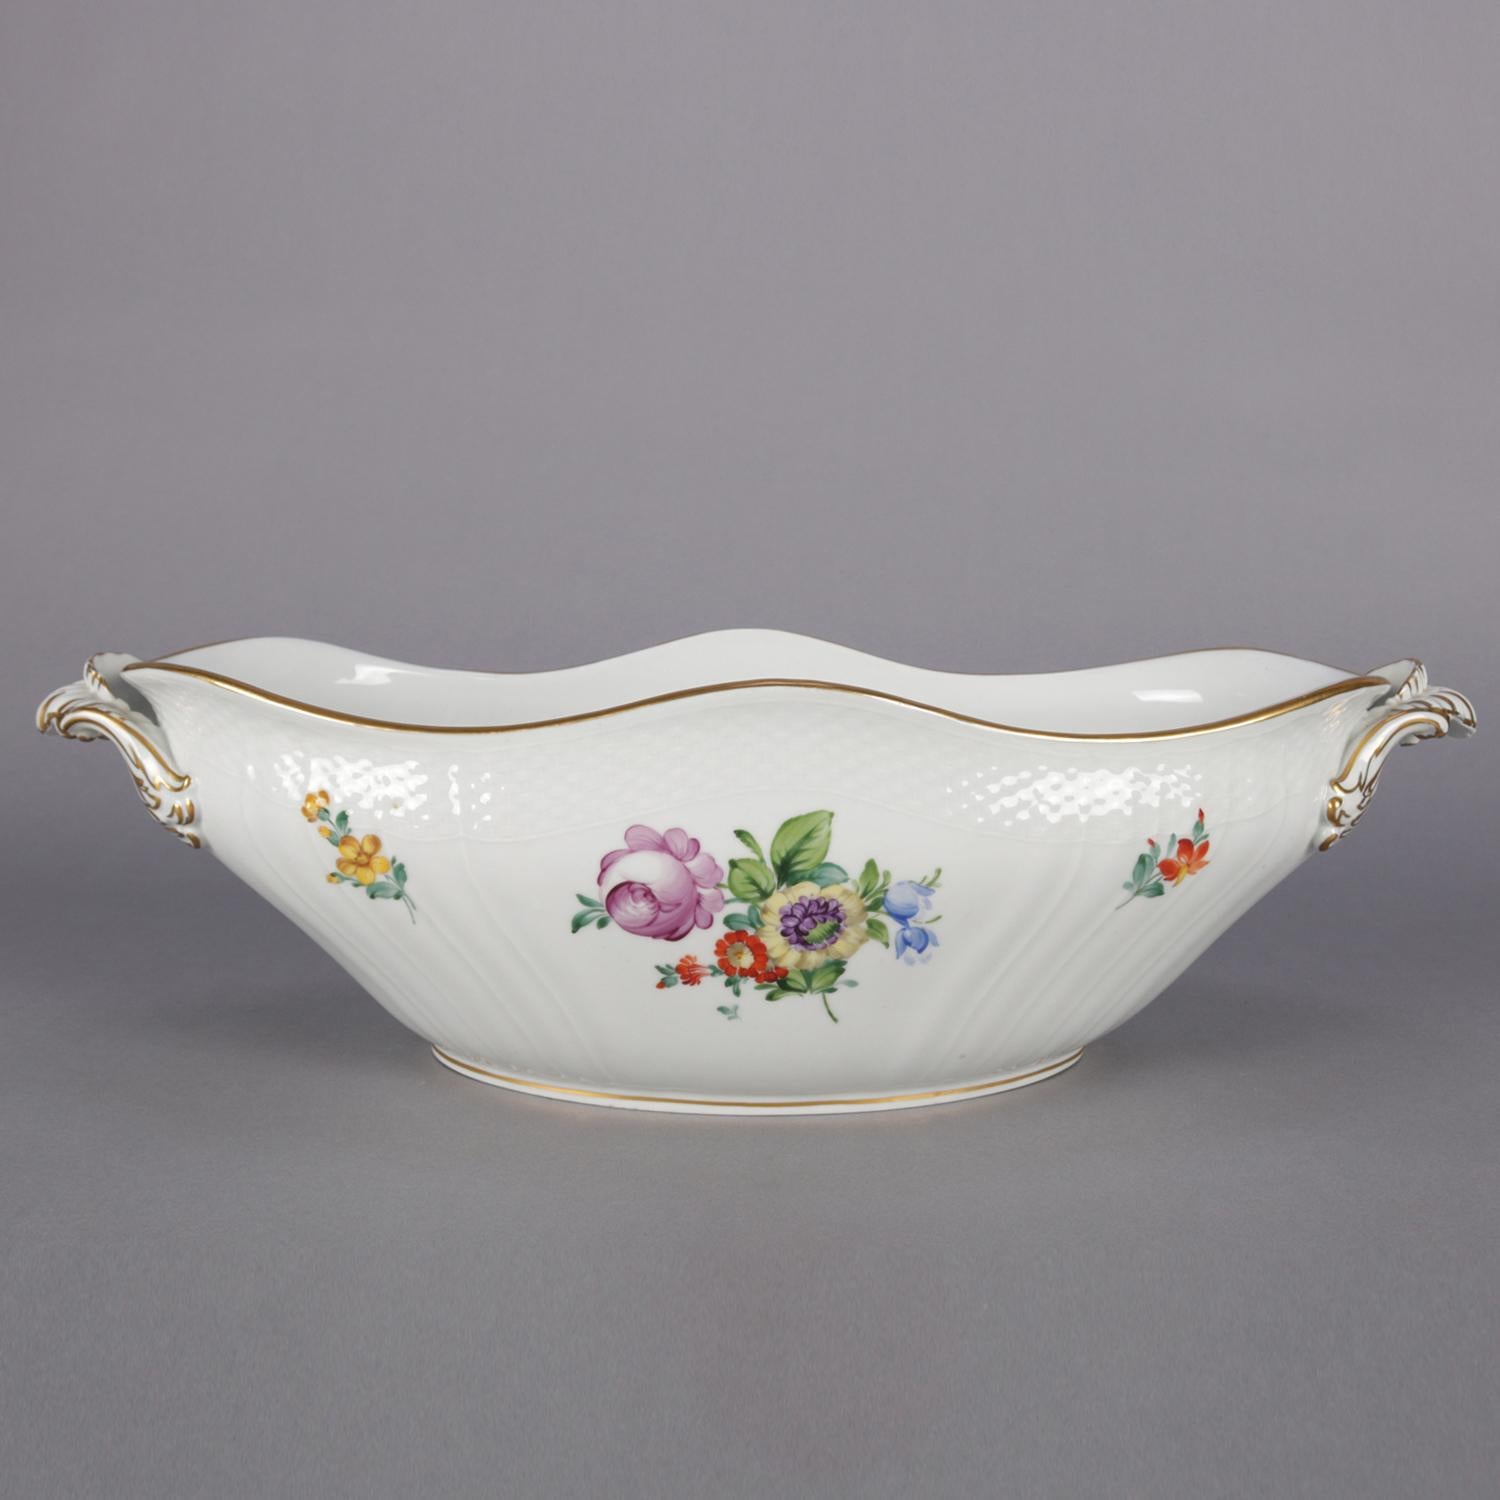 Danish Royal Copenhagen porcelain center bowl features scalloped oval form with double handles and decorated with hand-painted floral sprays inside and out, trimmed in gilt, reminiscent of Fora Danica, marked on base as photographed, 20th